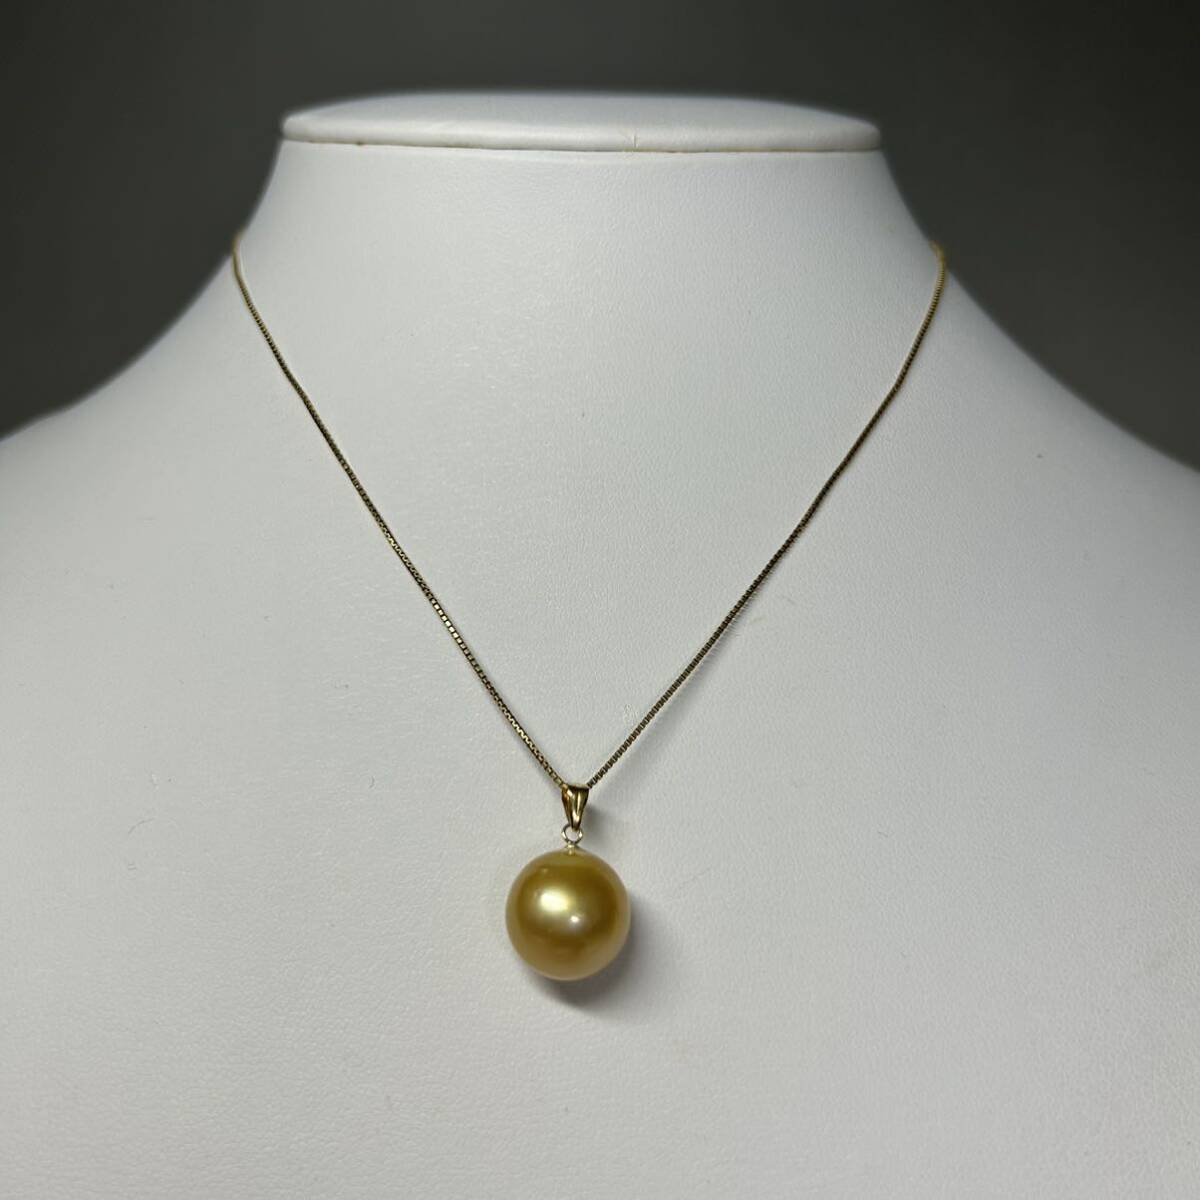 [ lustre eminent! large grain 12.5mm ]K18 natural south . pearl .. gloss eminent pendant top south . White Butterfly pearl 2.8g natural Gold pearl Pearljewelry